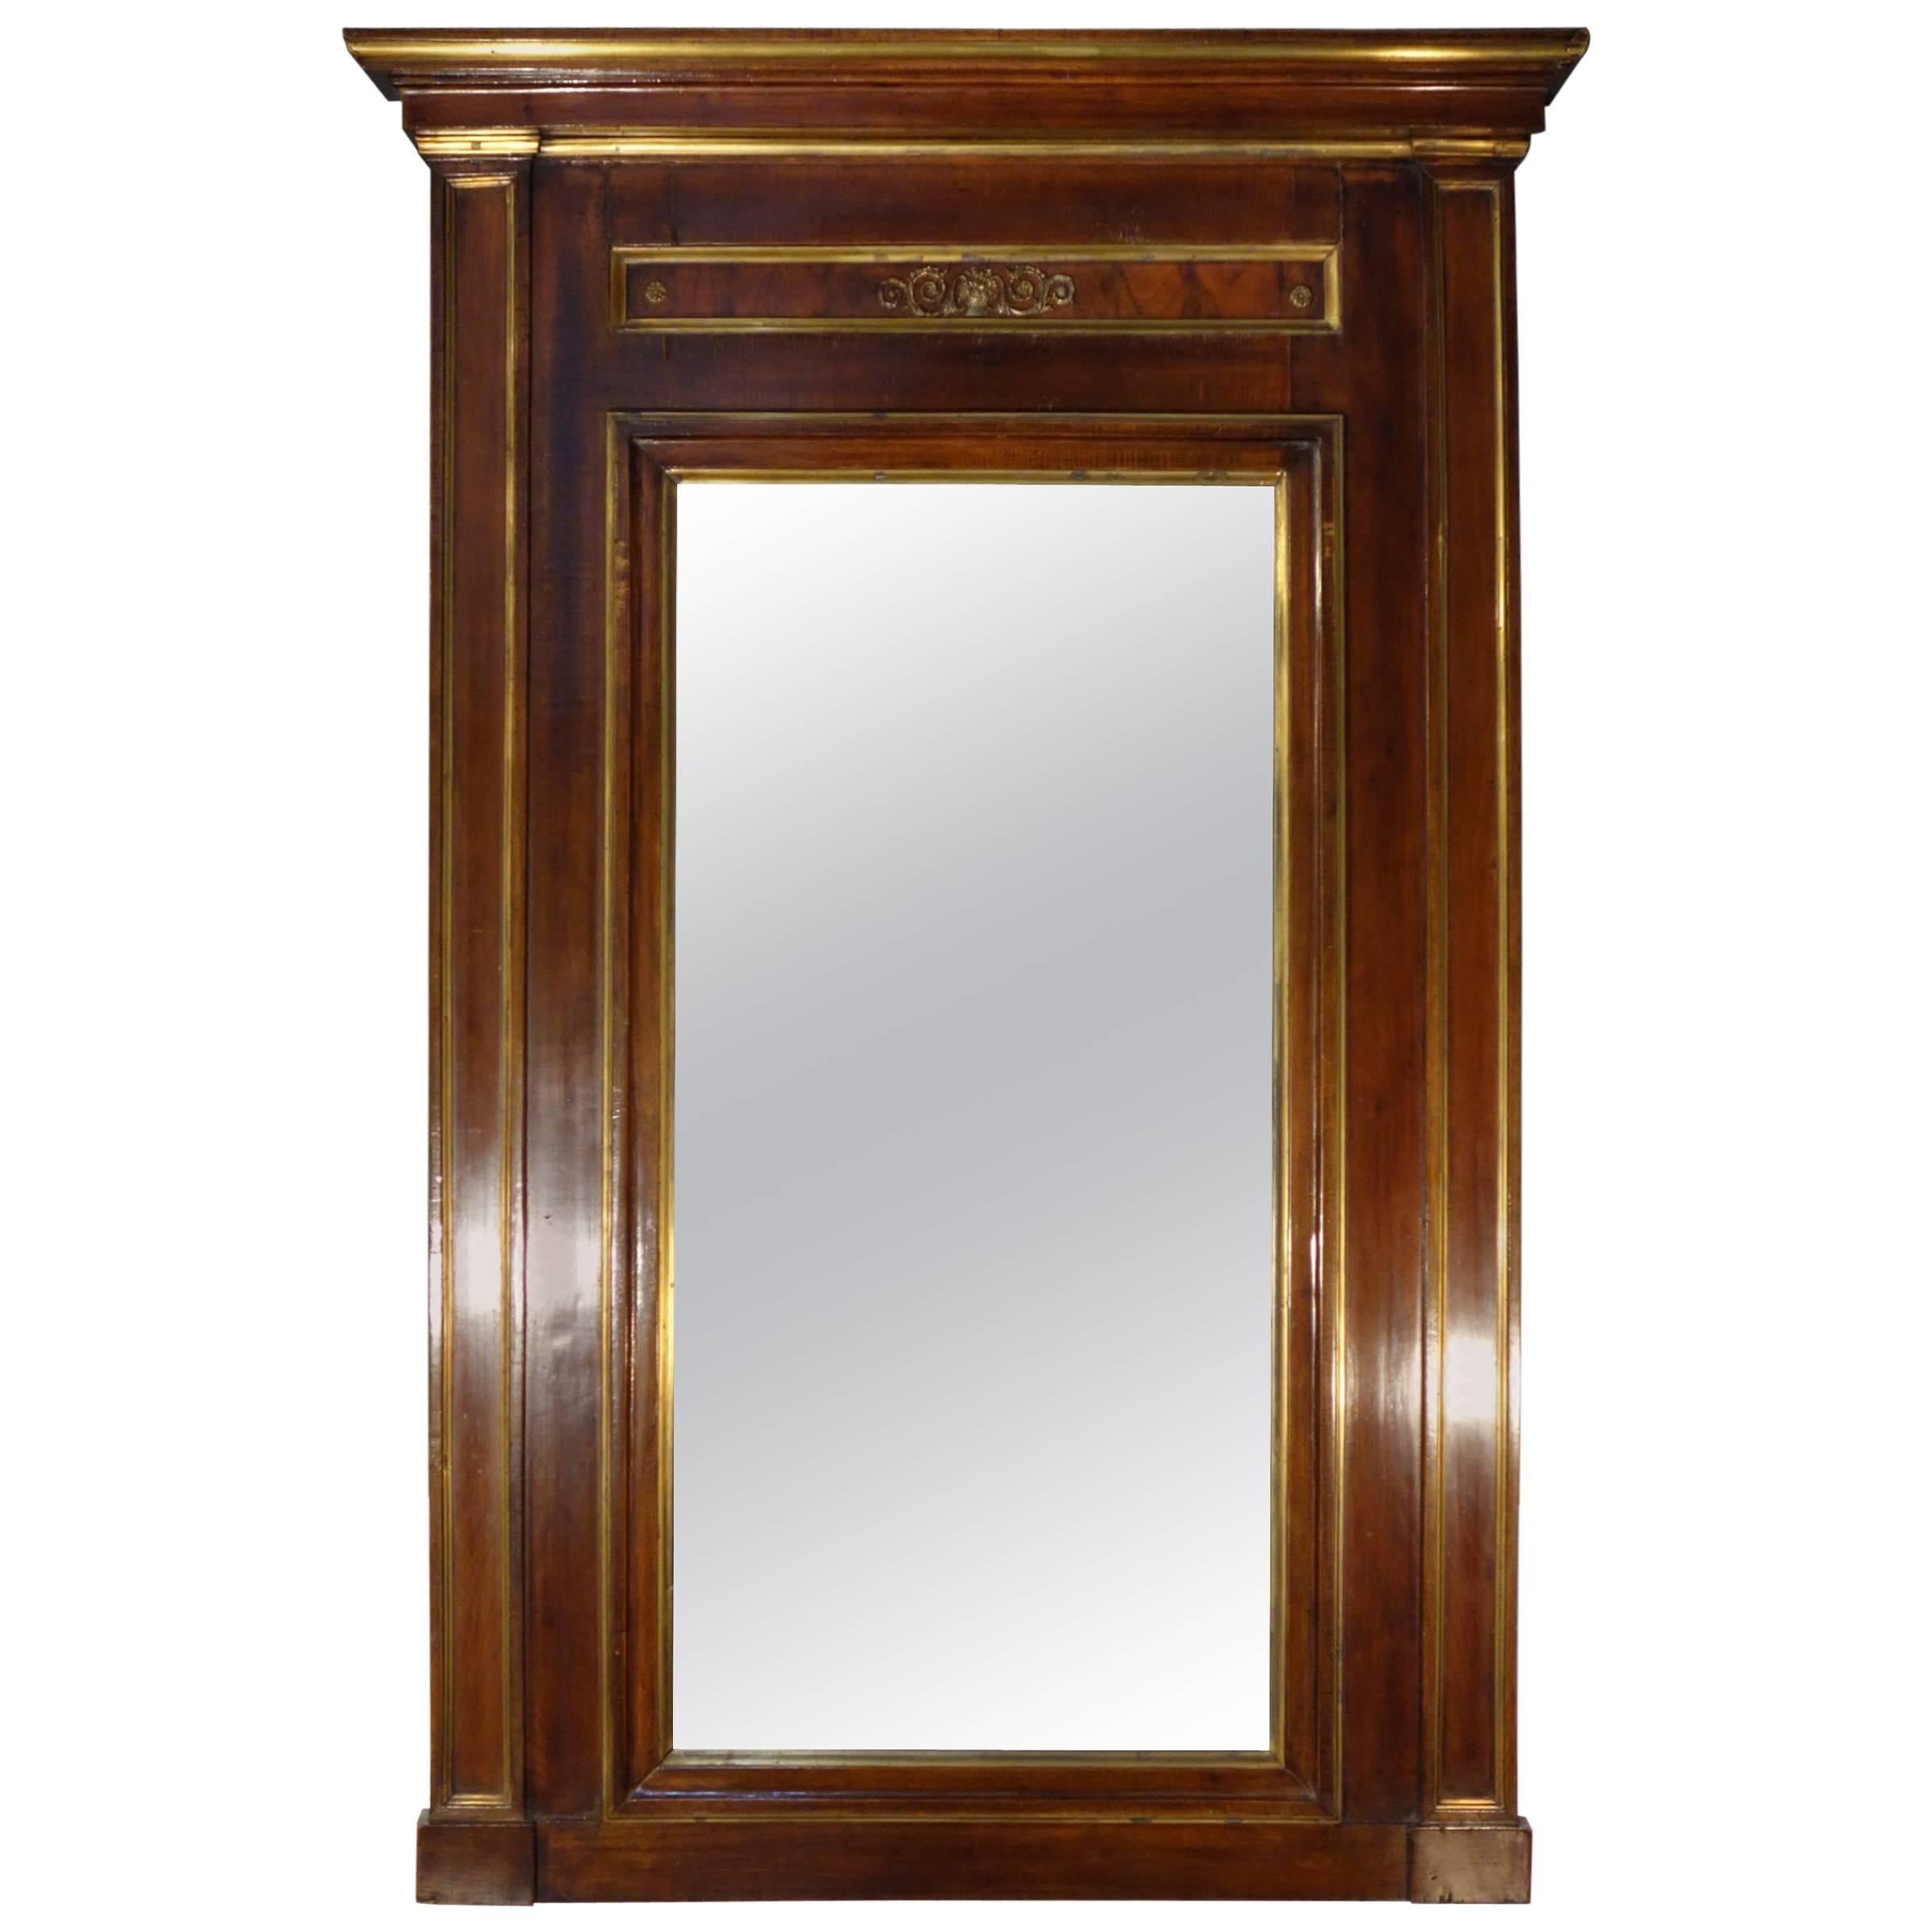 Early 19th Century Empire Framed Mirror Walnut with Gold Detail Circa 1820